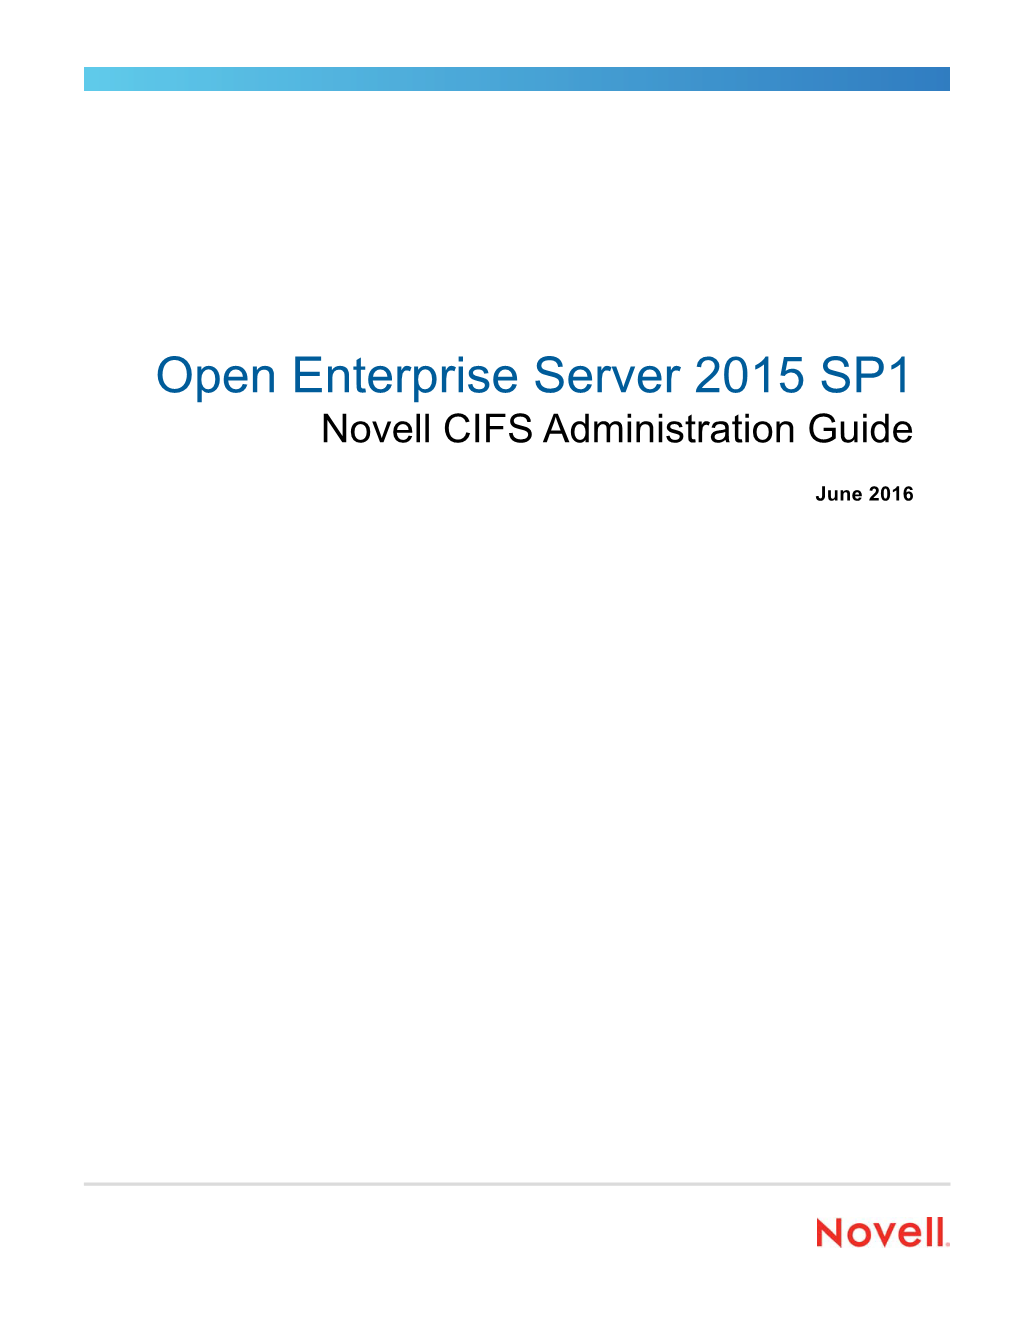 OES 2015 SP1: Novell CIFS for Linux Administration Guide